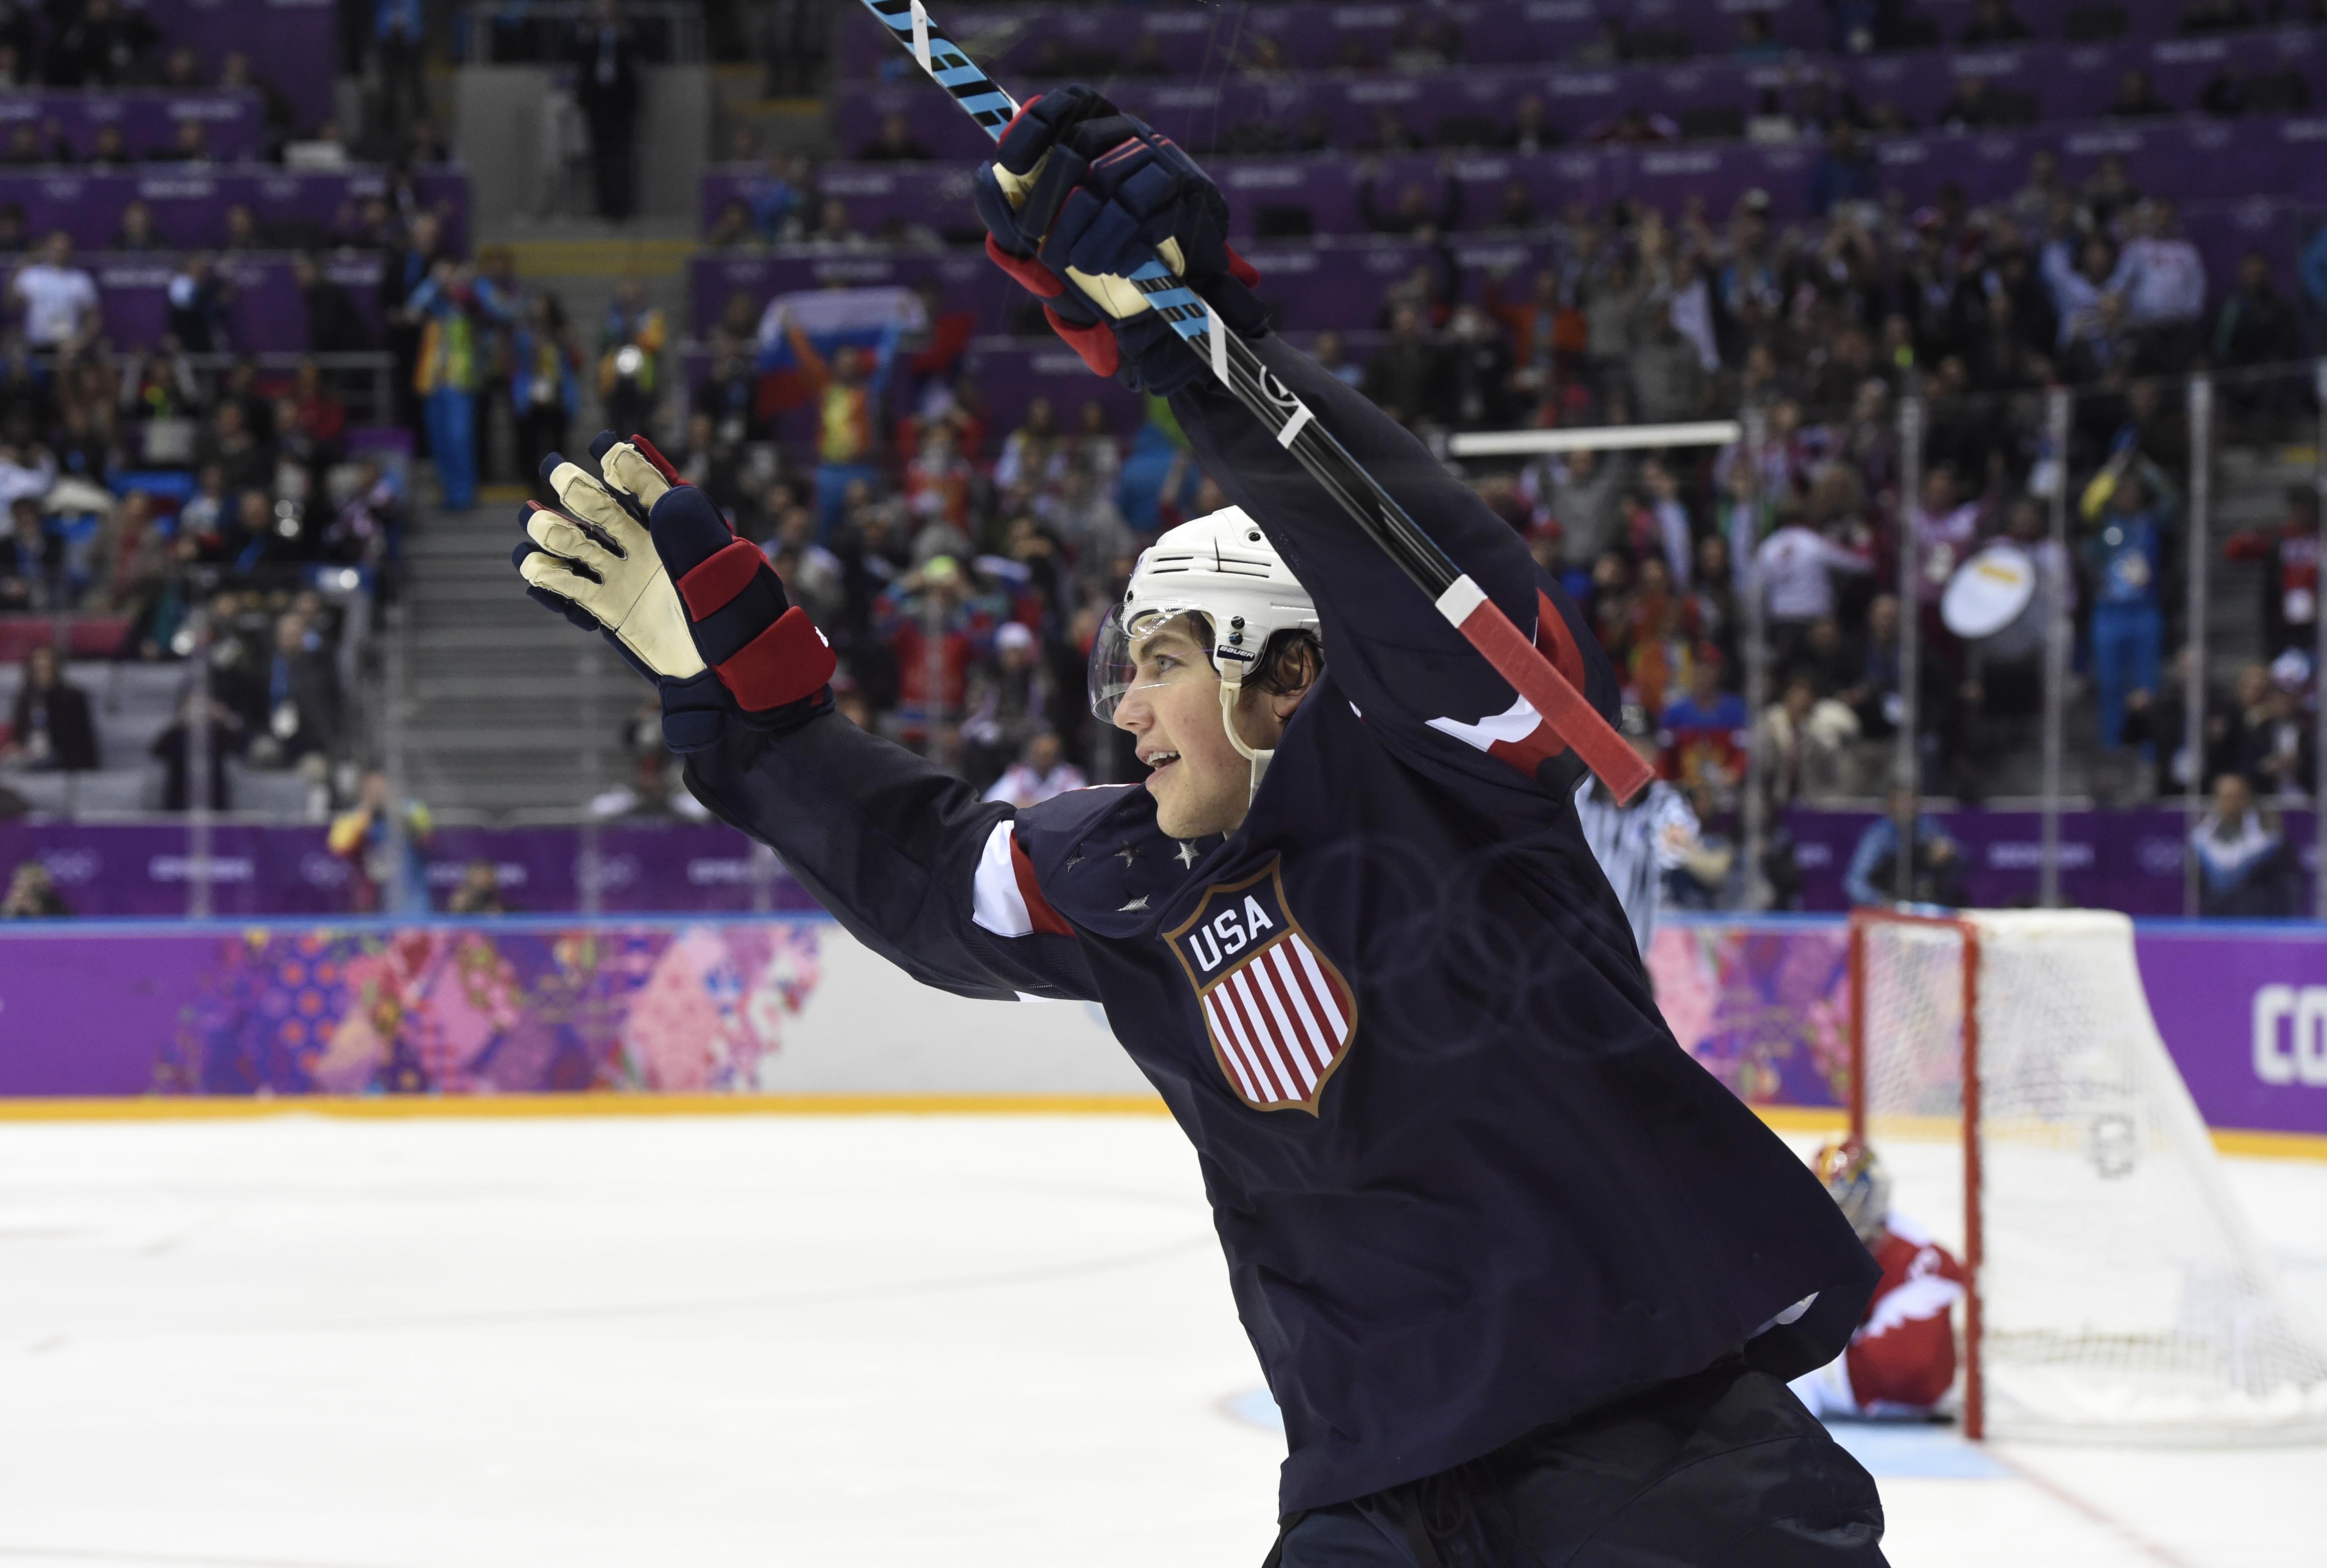 Winter Olympics Hockey: Schedule, How to Watch, Channels, Apps